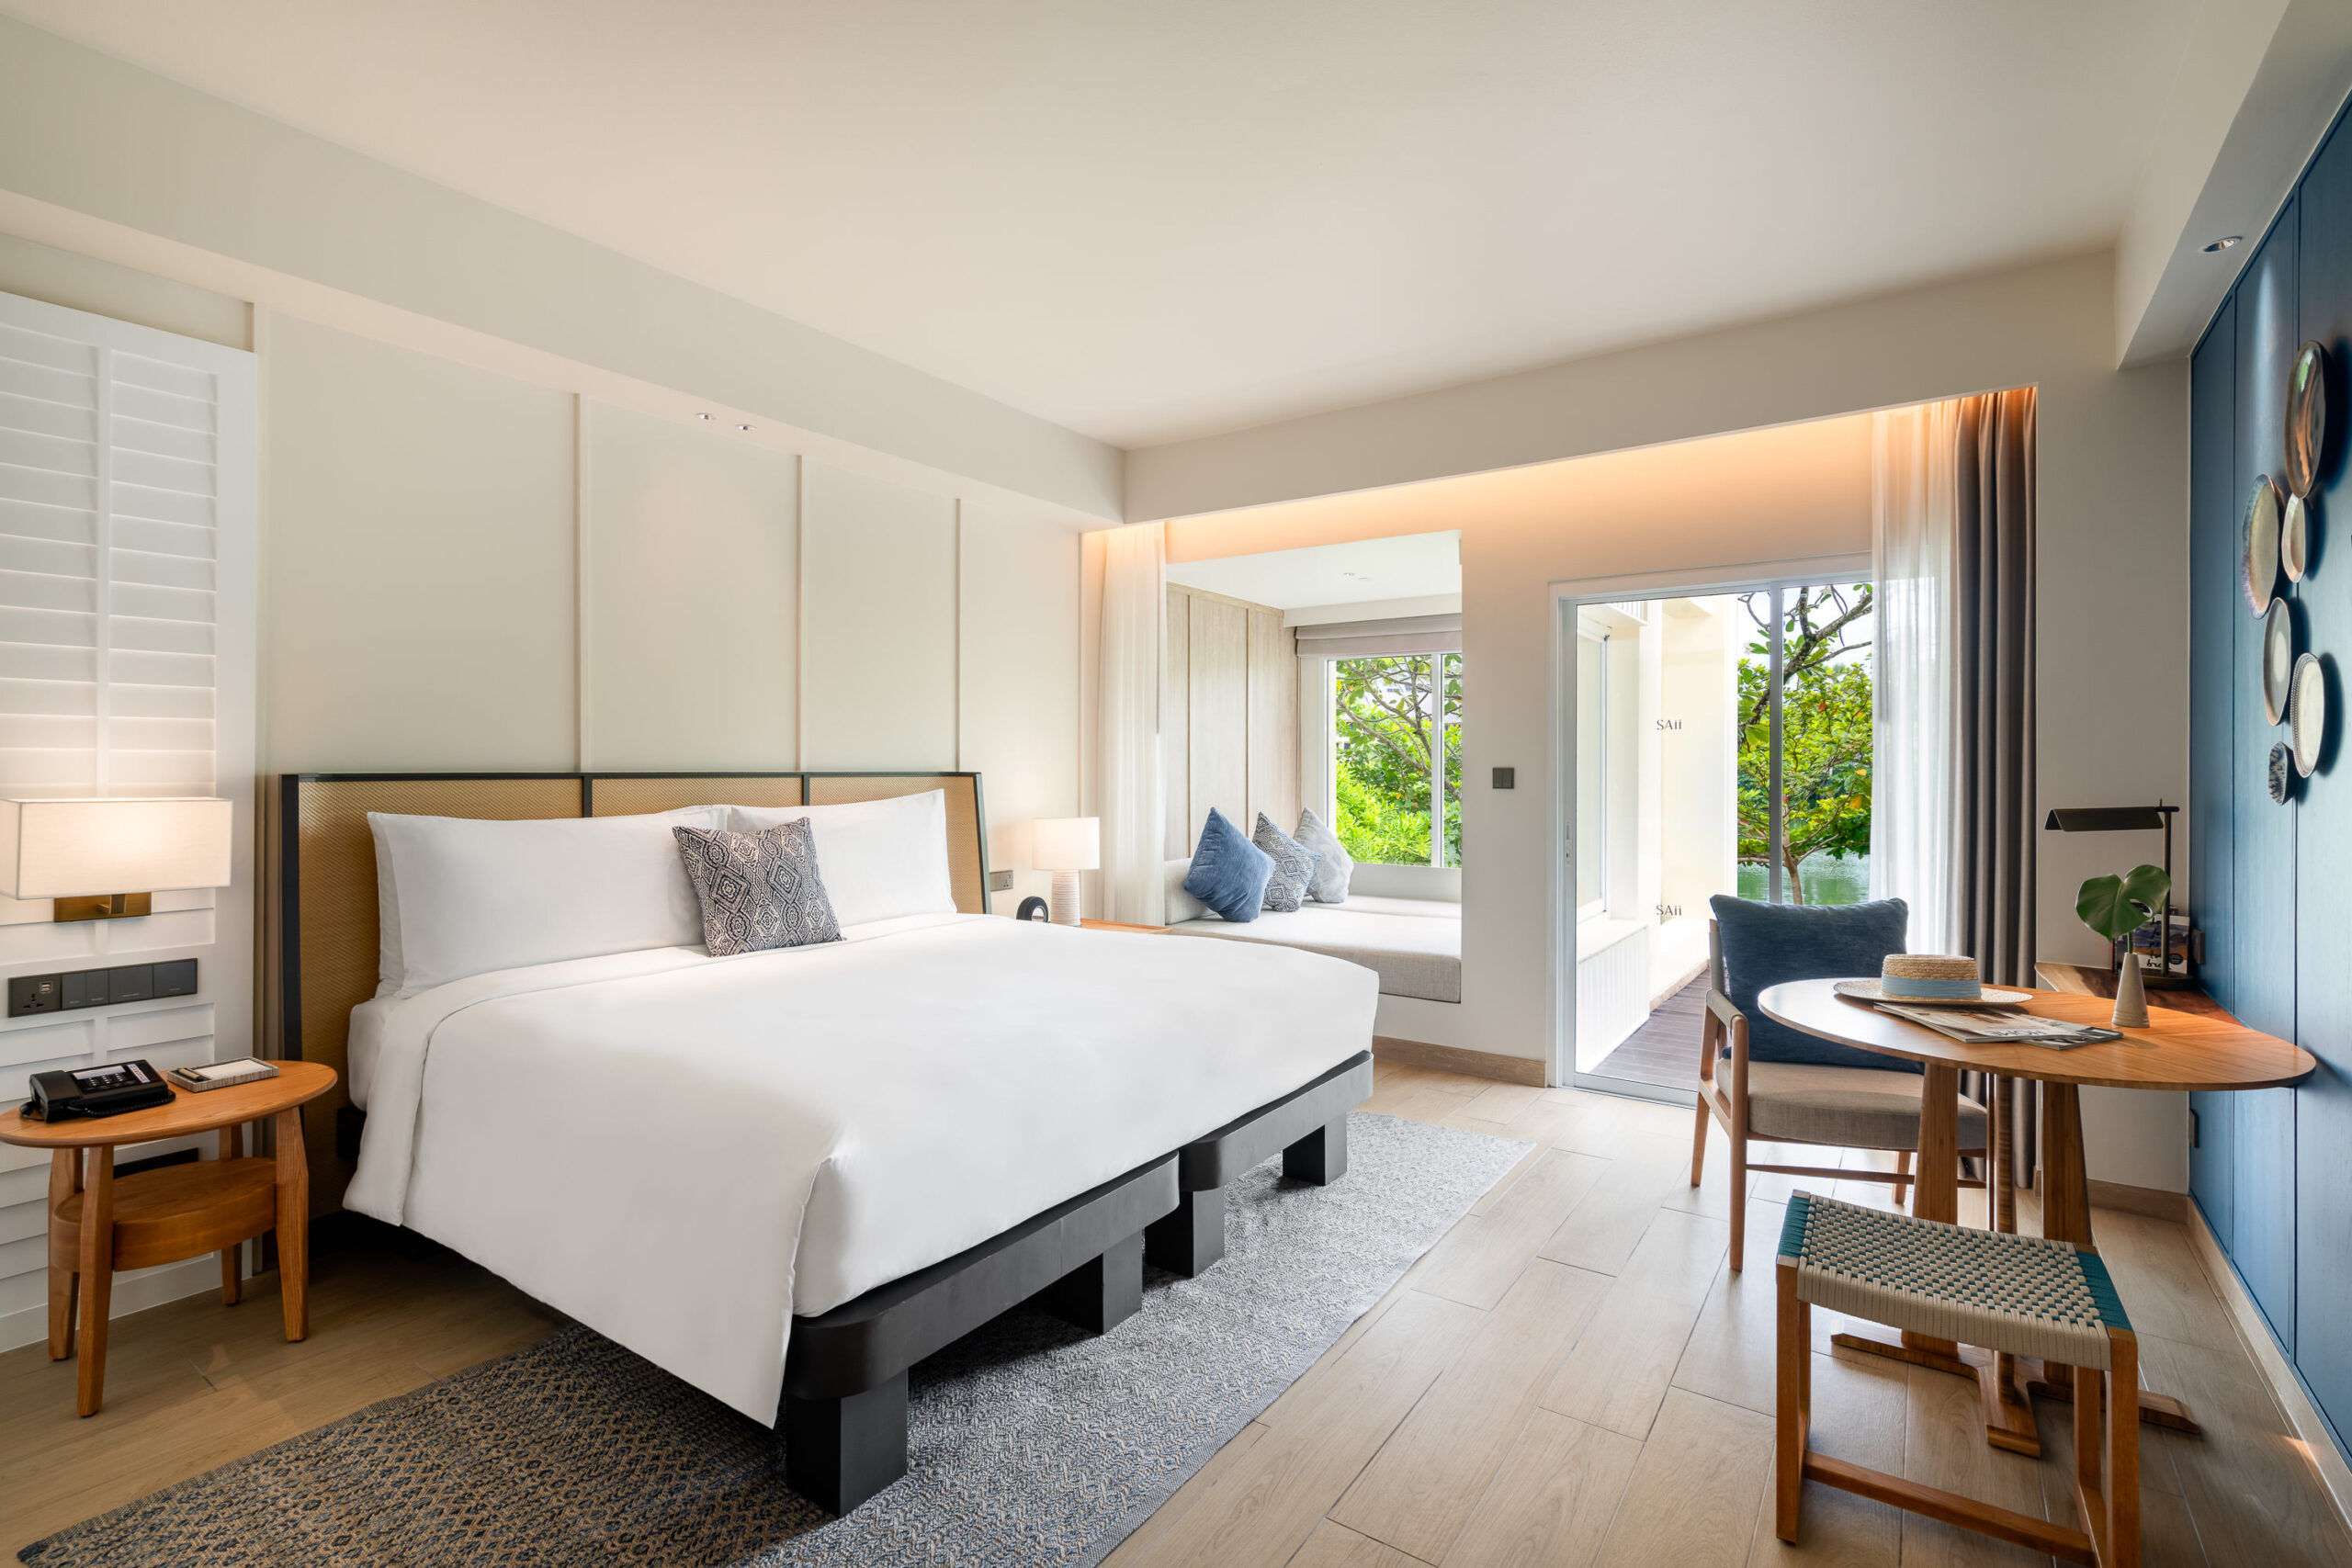 The new Premium Lagoon Rooms at SAii Laguna Phuket are designed in a contemporary style, with elements of Phuket’s heritage